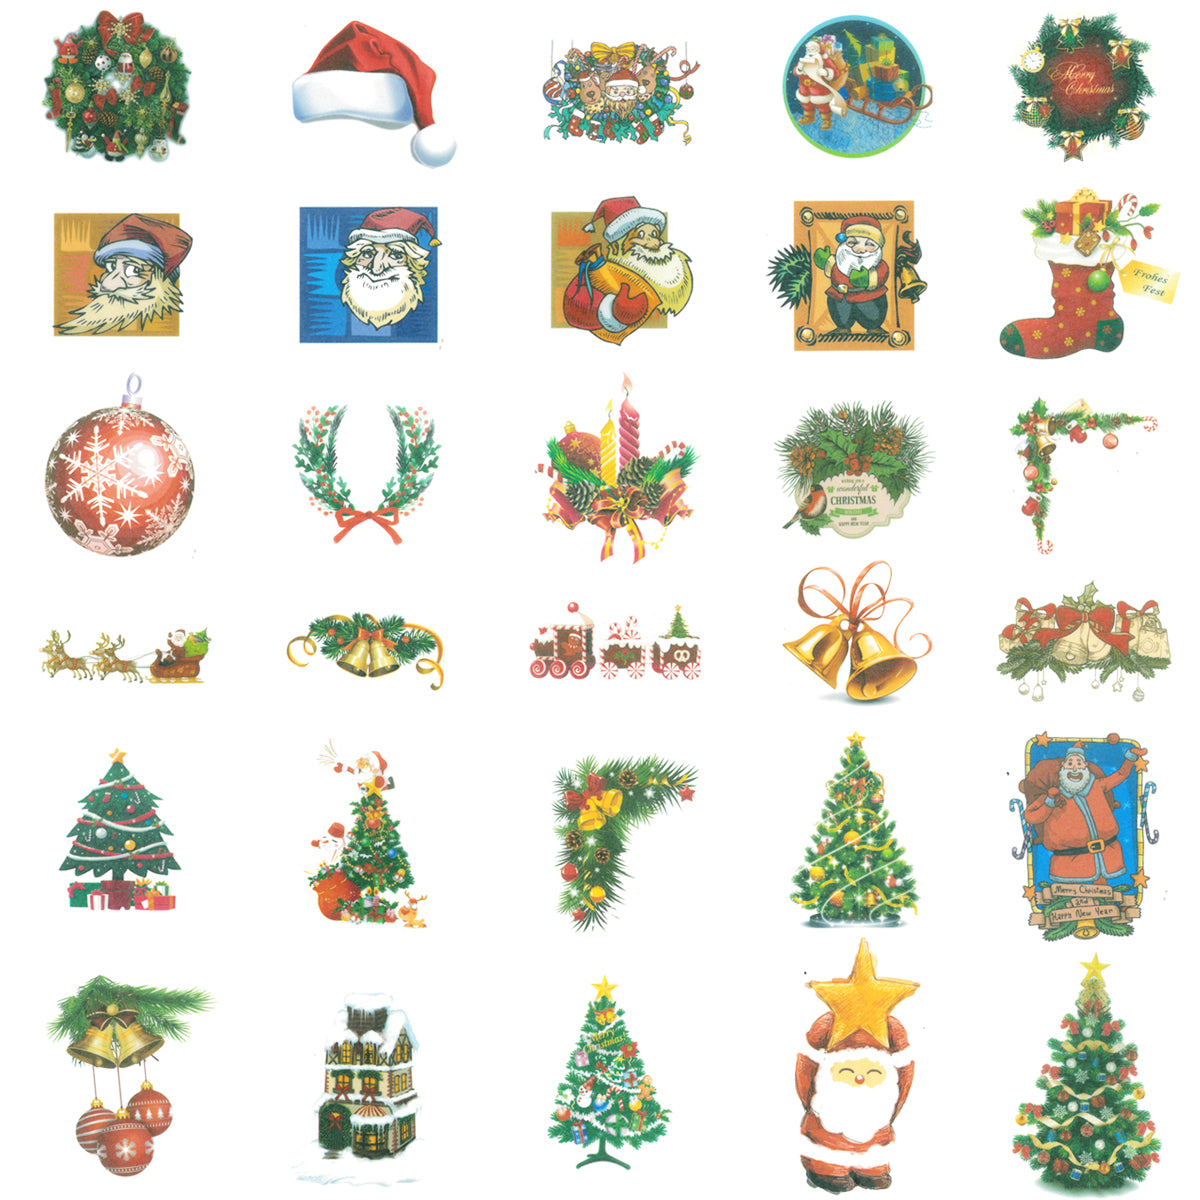 Wrapables Holiday Scrapbooking Washi Stickers, DIY Crafts for Stationery, Diary, Card Making (60 pcs)